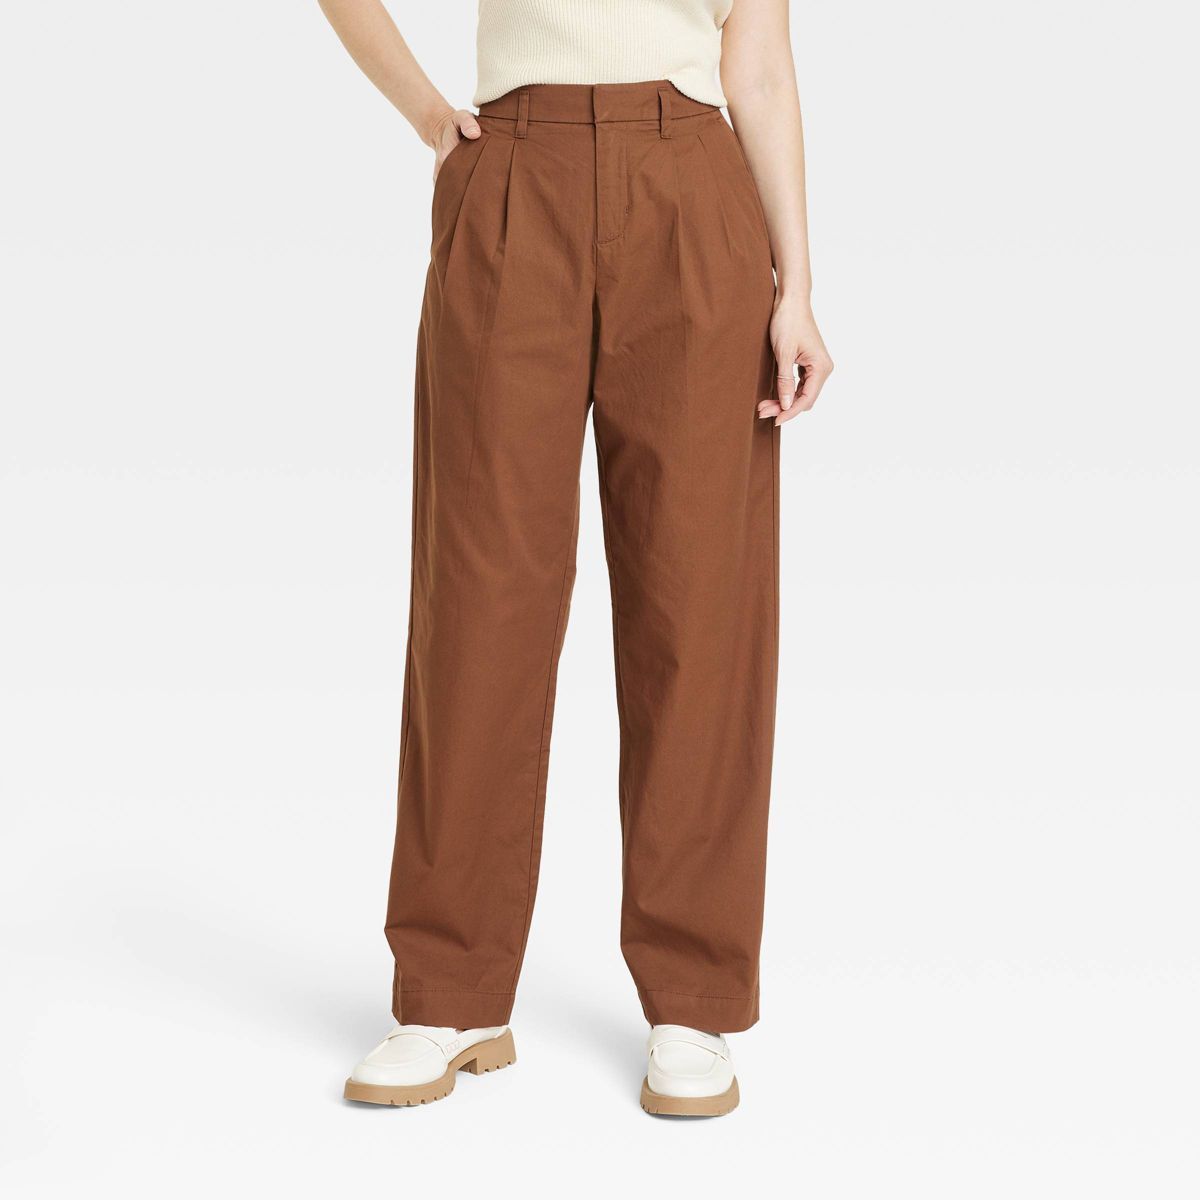 Women's High-Rise Pleat Front Straight Chino Pants - A New Day™ | Target